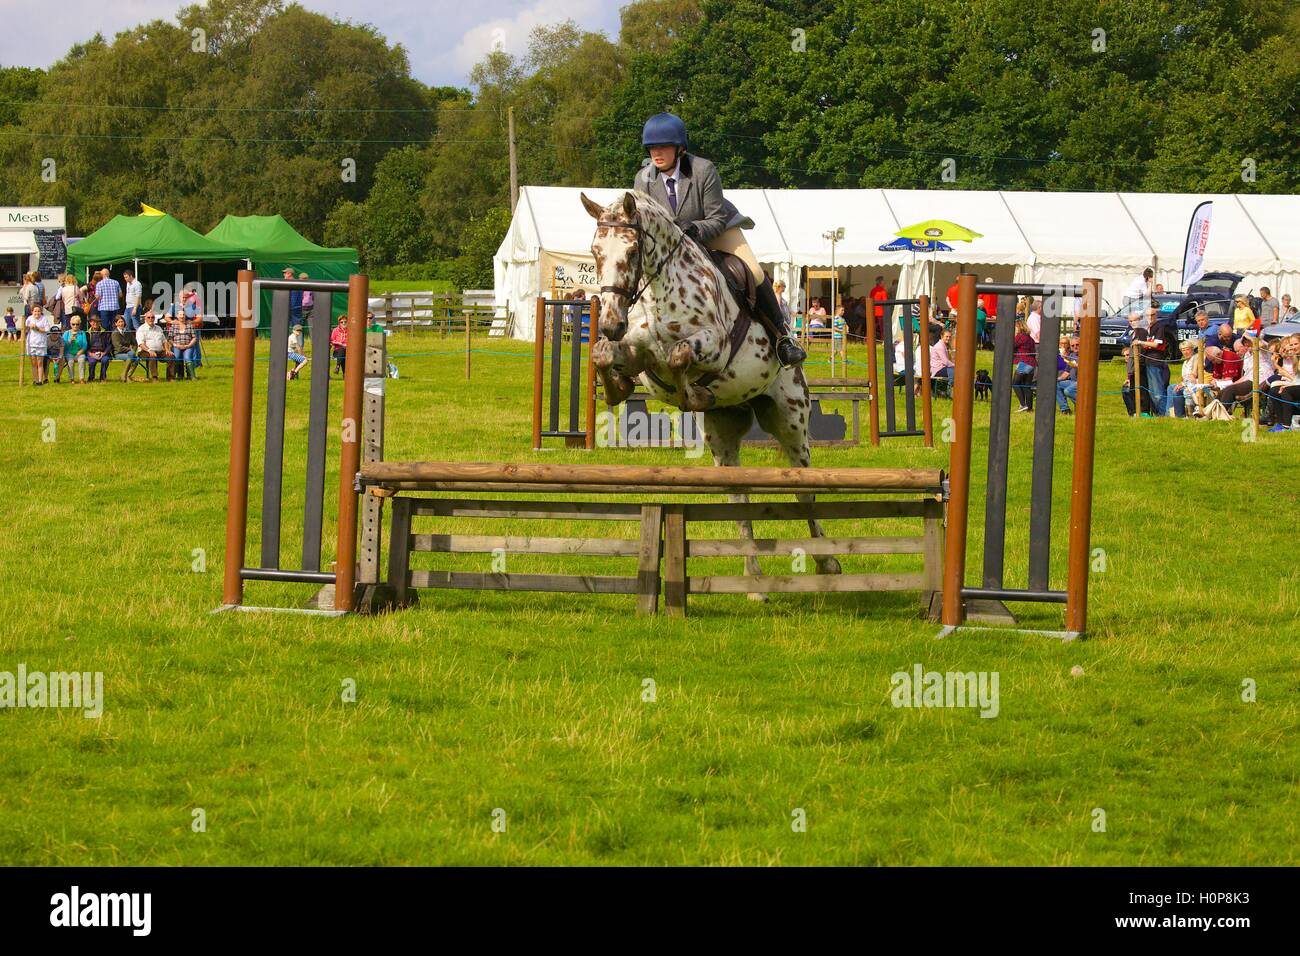 Girl riding a horse show jumping a fence. Bellingham Show and Country Festival, Bellingham, Northumberland, England, UK. Stock Photo